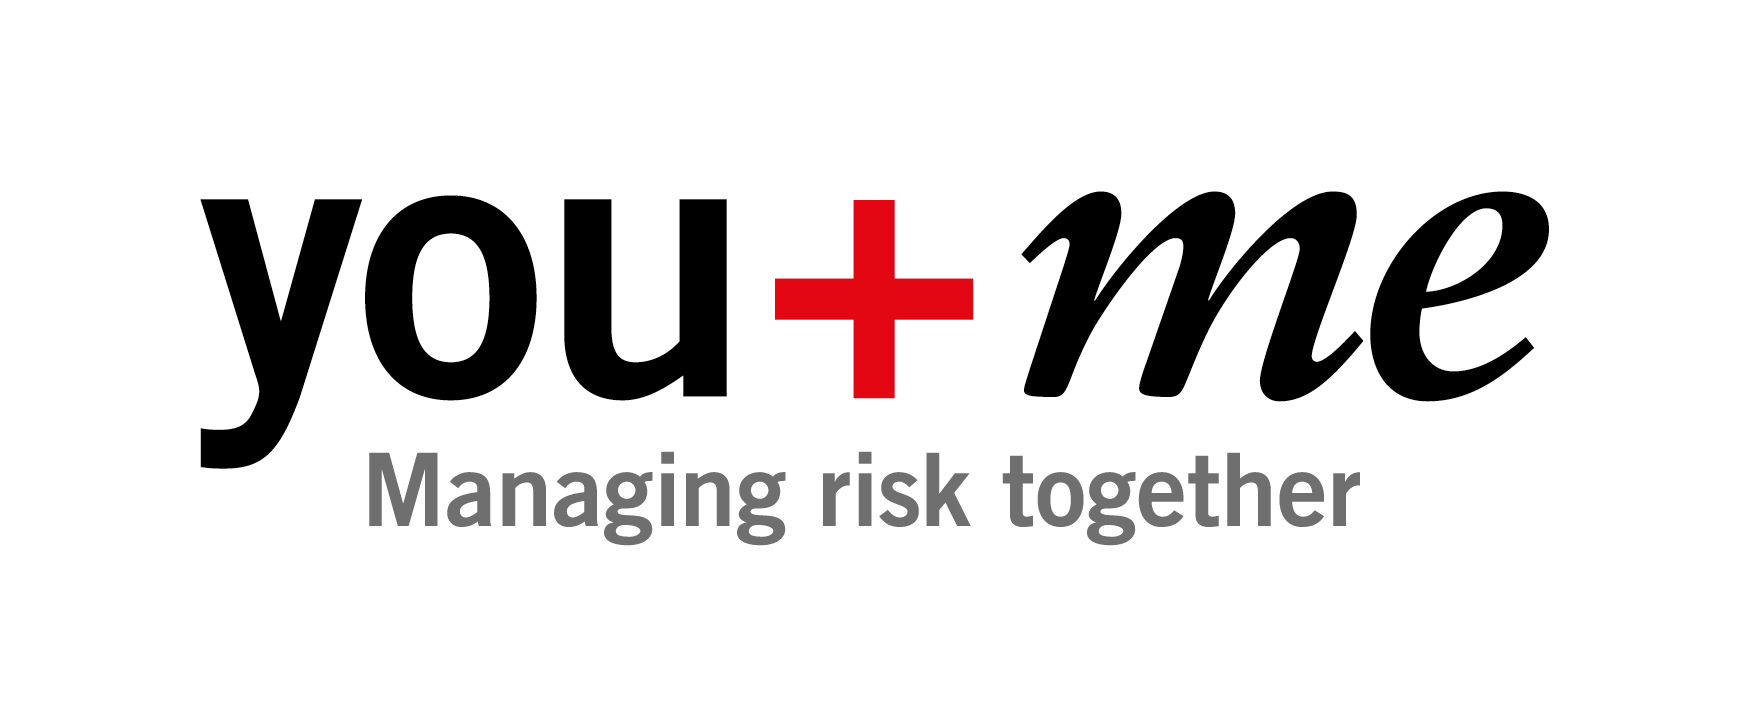 You and me, managing risk together text.